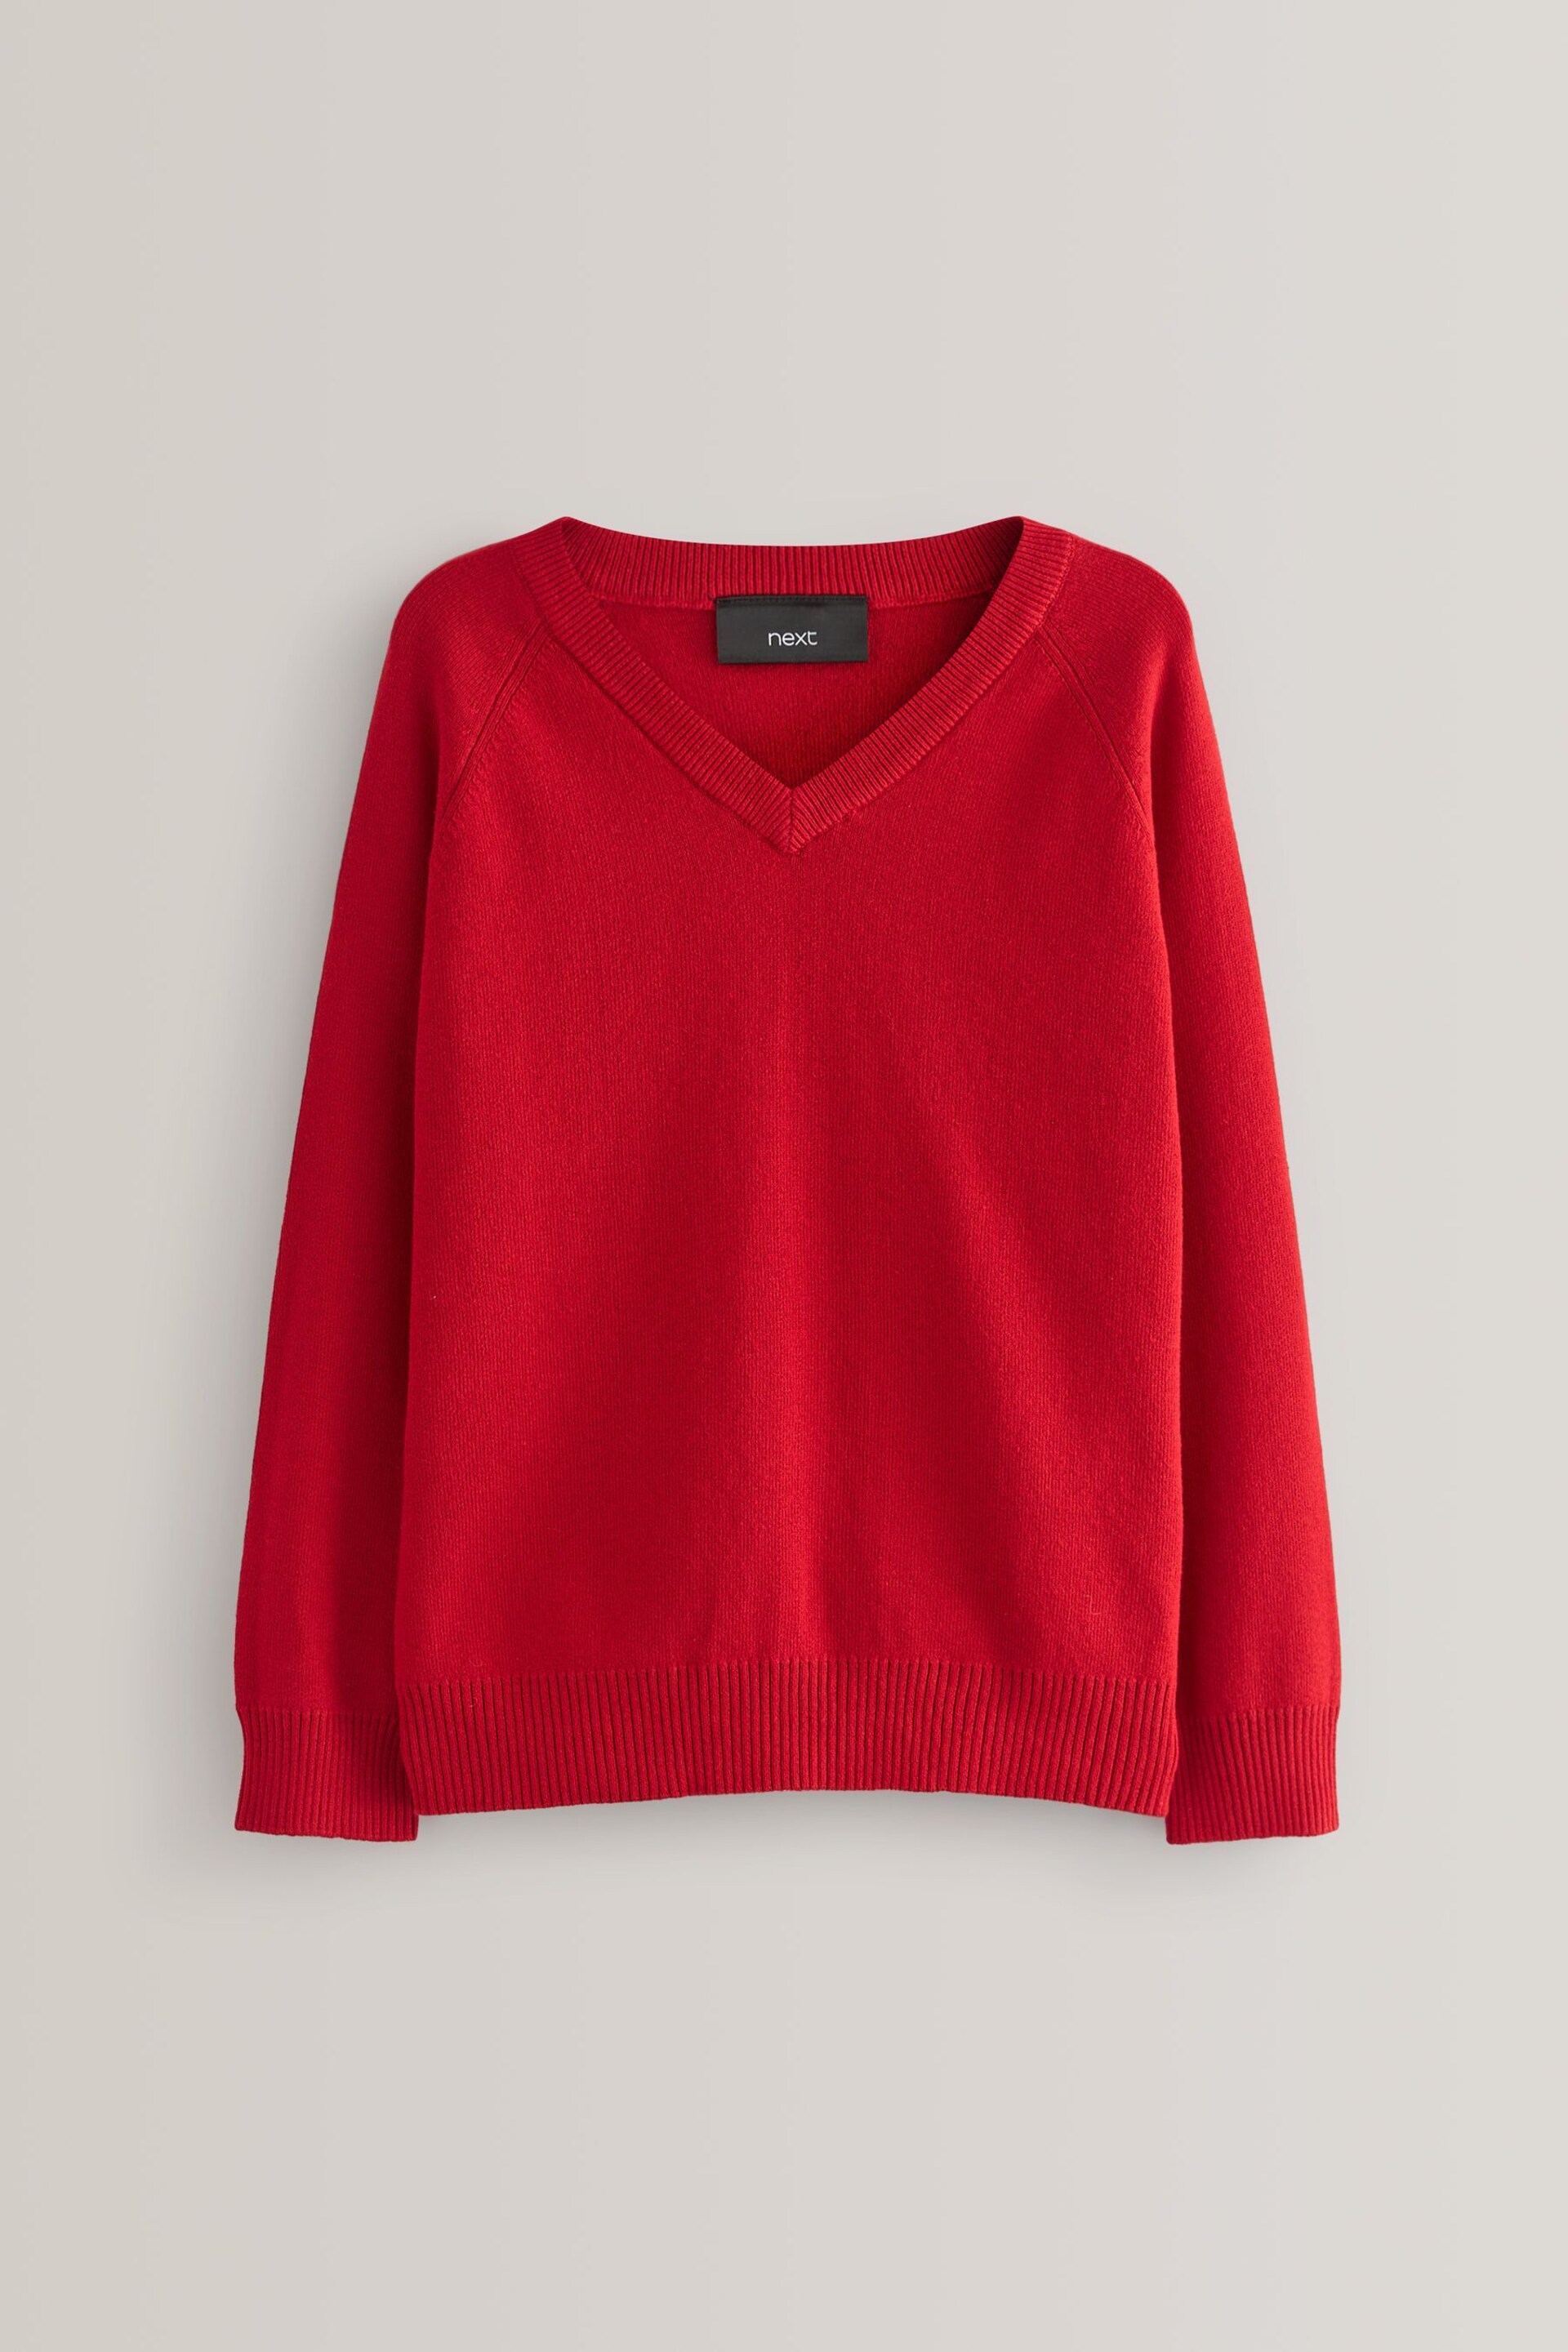 Red Knitted V-Neck School Jumper (3-18yrs) - Image 1 of 2